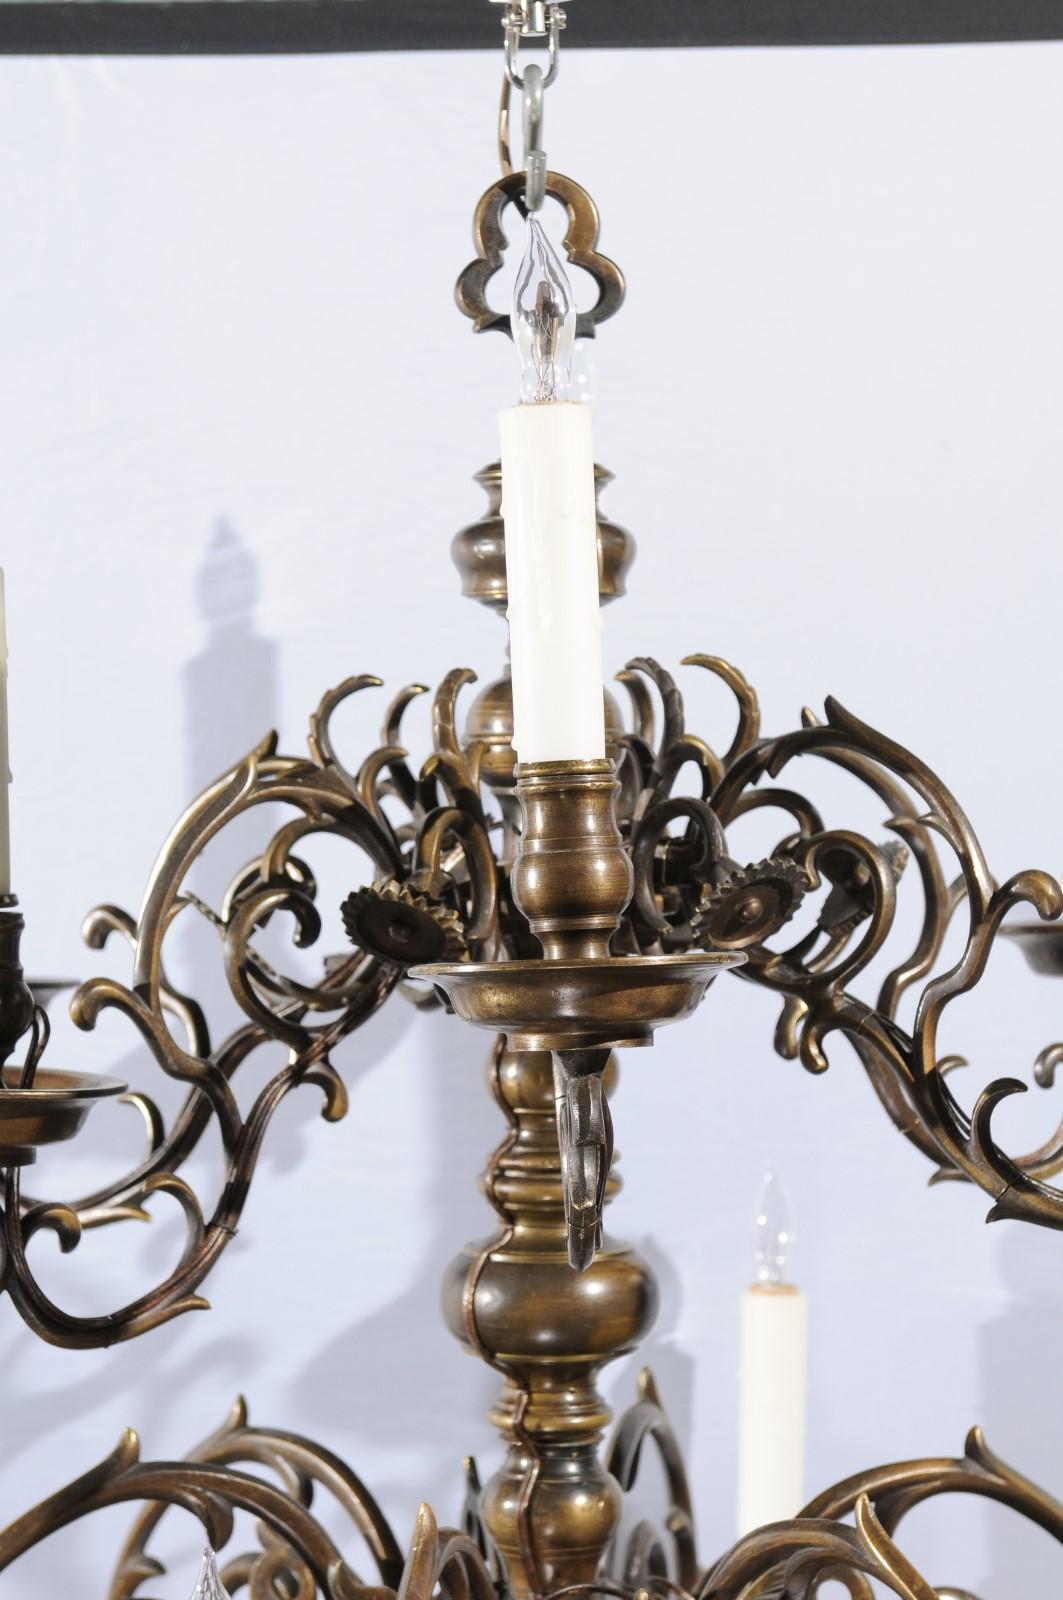 Large 2-Tier Dutch Brass Chandelier with 12 Lights, 18th Century For Sale 4